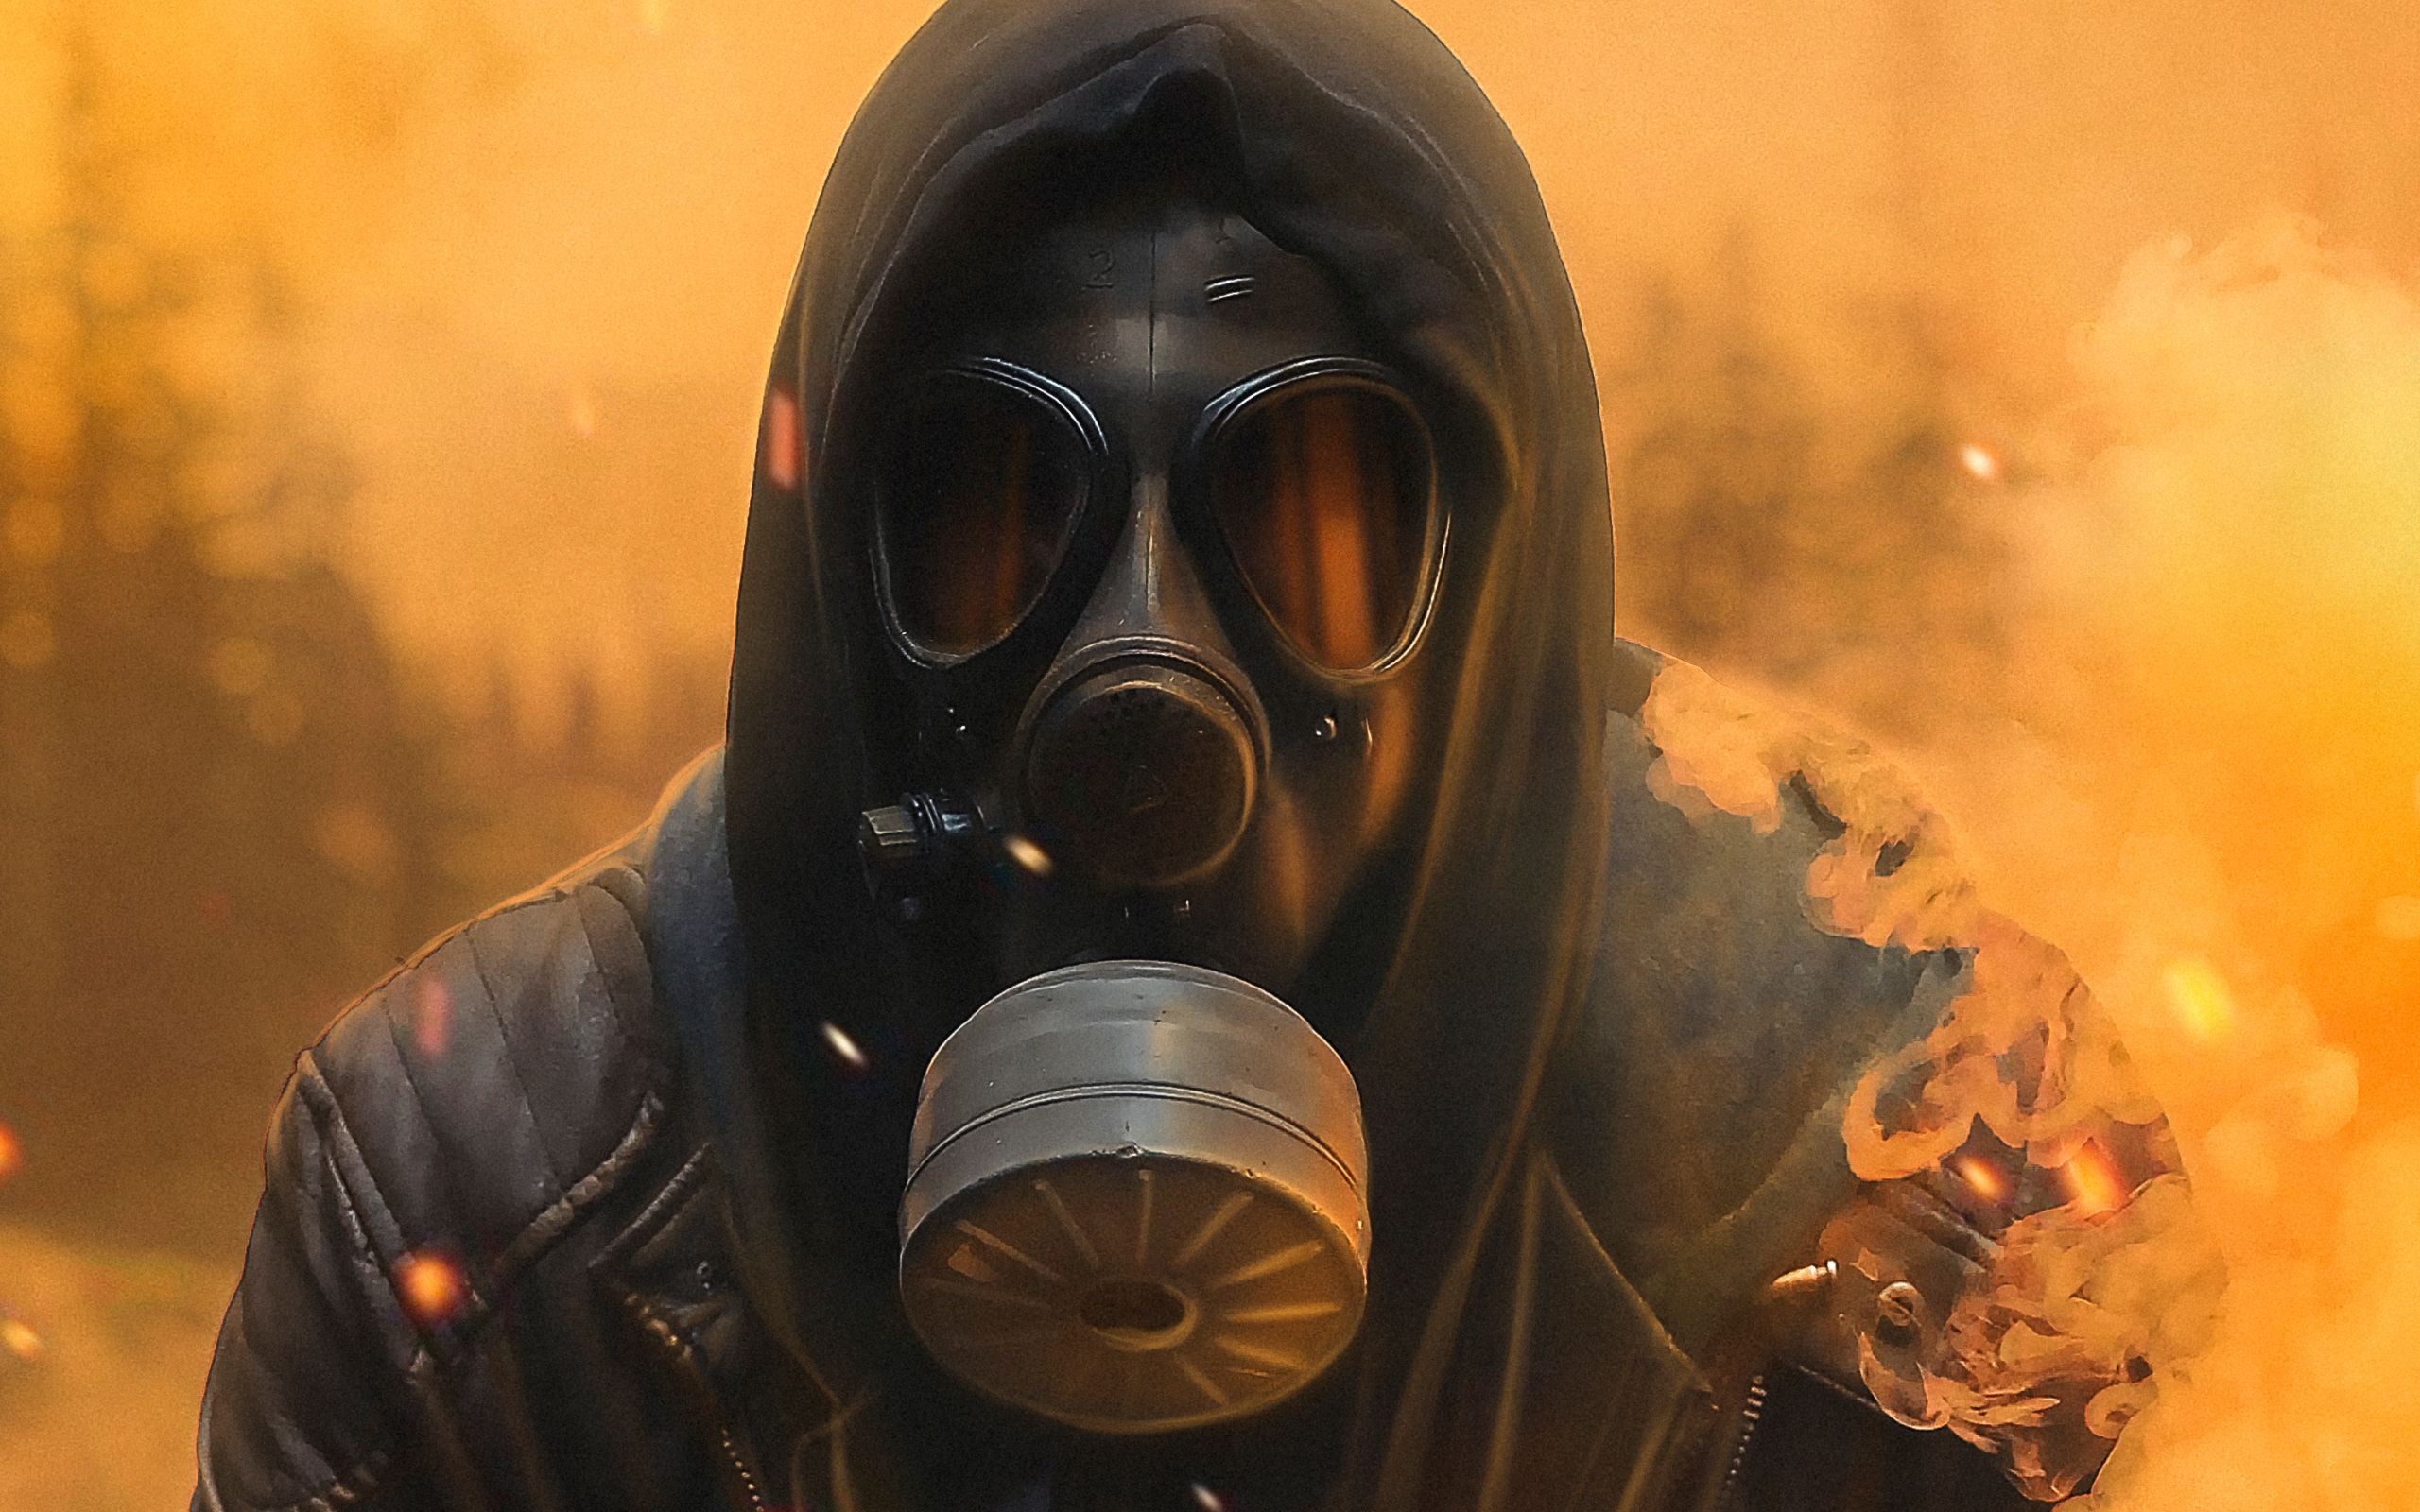 cool gas mask designs